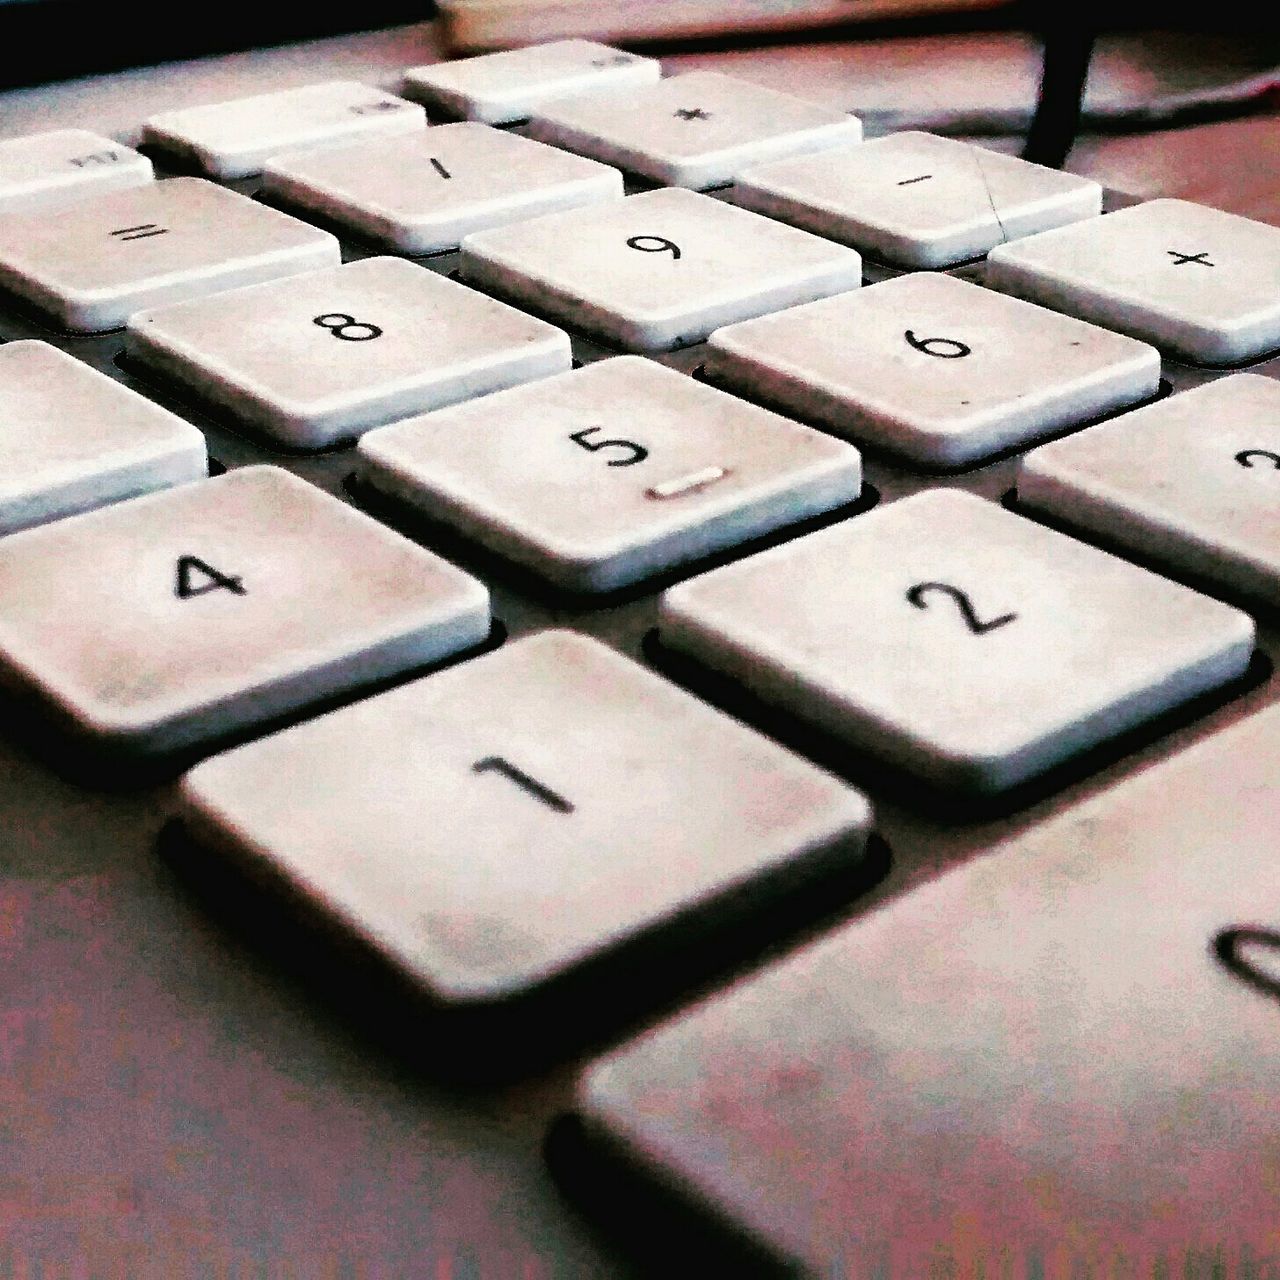 indoors, close-up, communication, number, computer keyboard, technology, connection, alphabet, wireless technology, computer key, text, still life, selective focus, full frame, high angle view, push button, western script, backgrounds, computer, laptop